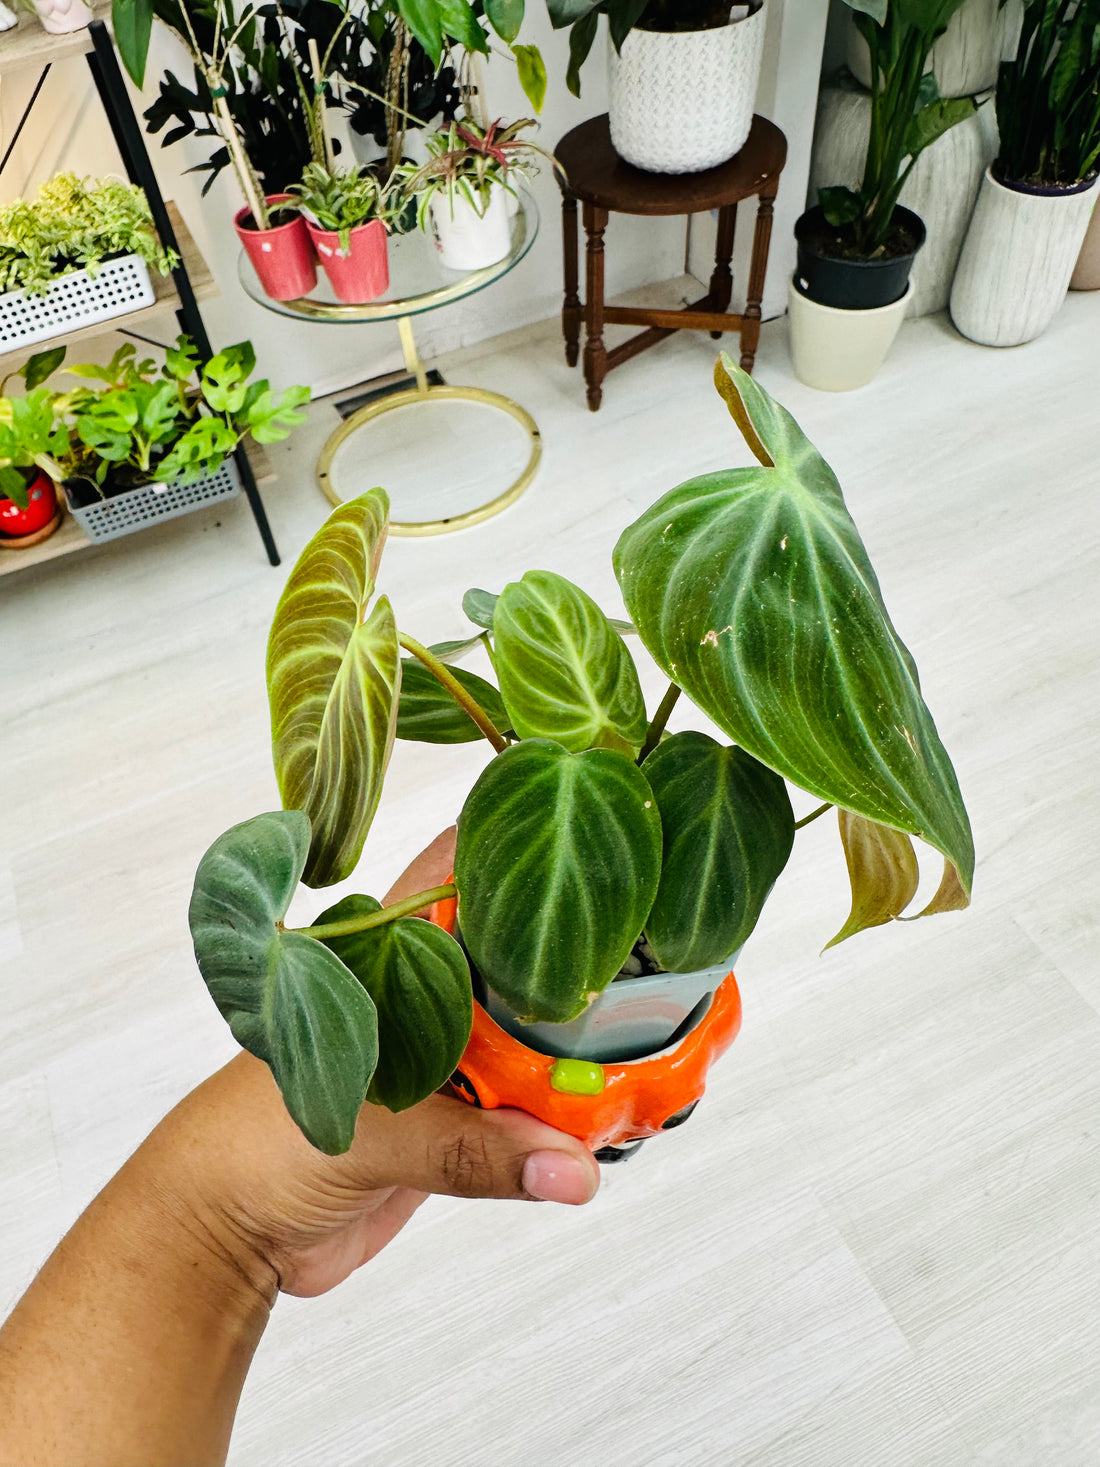 Philodendron EI Choco Red